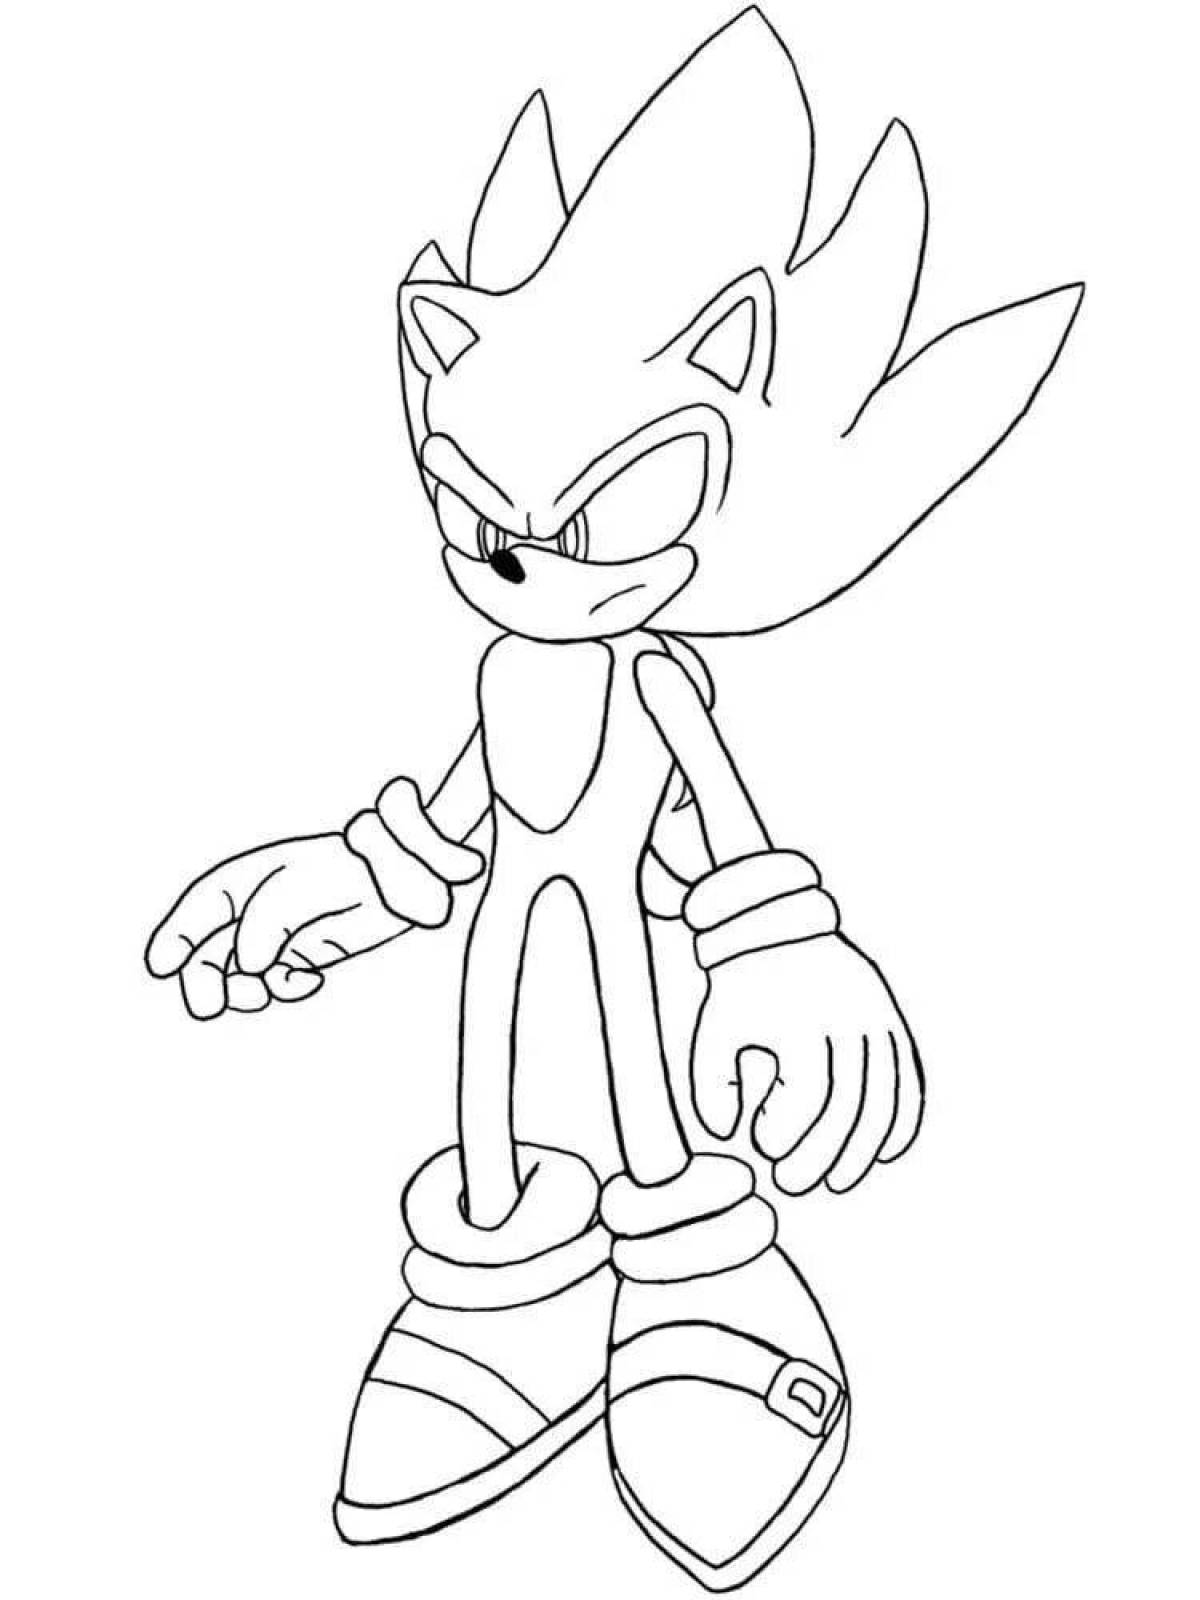 Sonic x z amazing coloring book